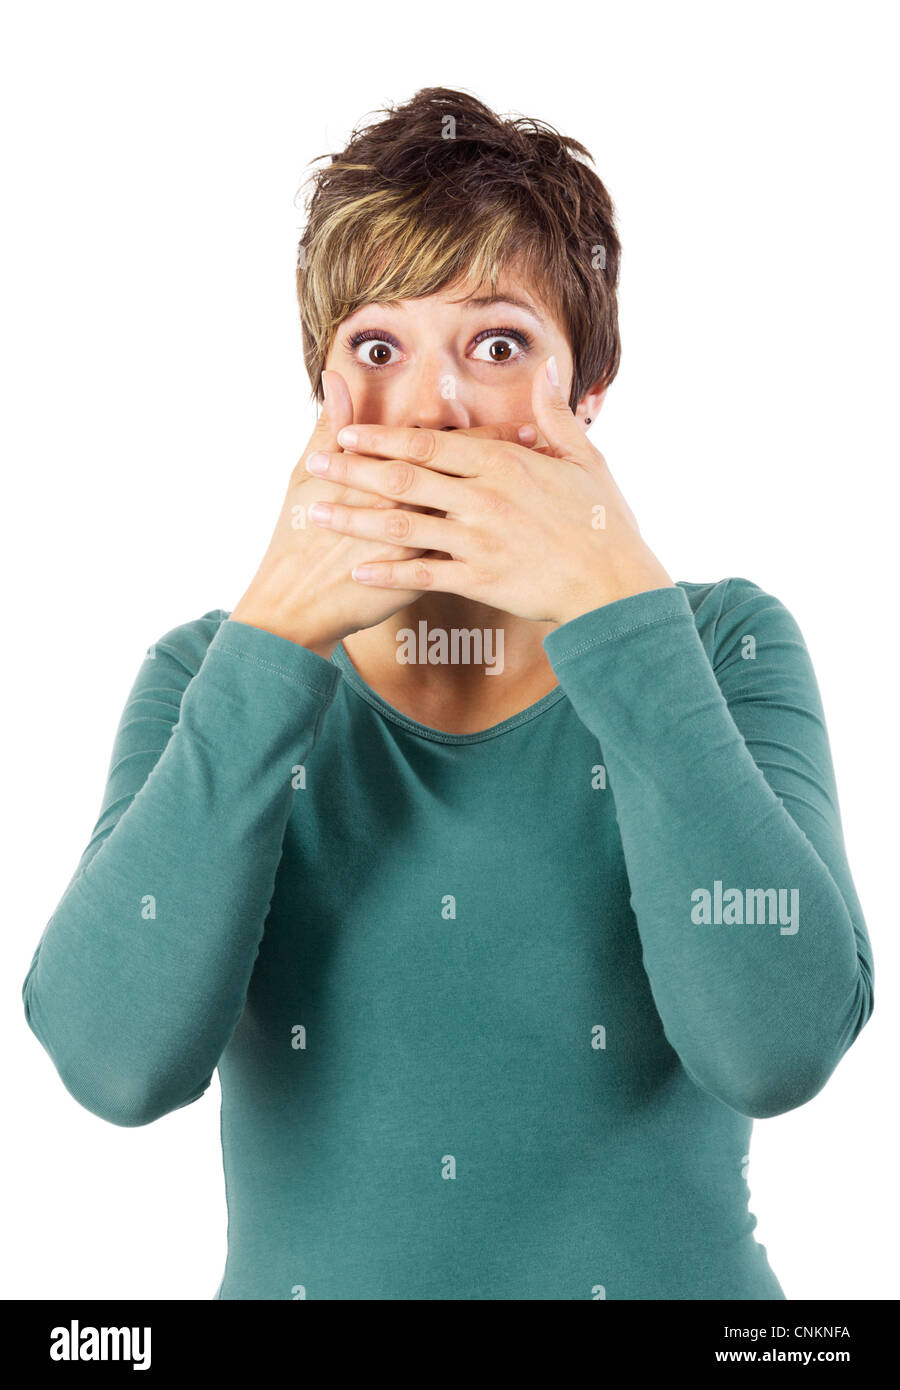 Surprise looking young woman covering her mouth, like one of the three monkeys. Isolated studio shot against a white background. Stock Photo